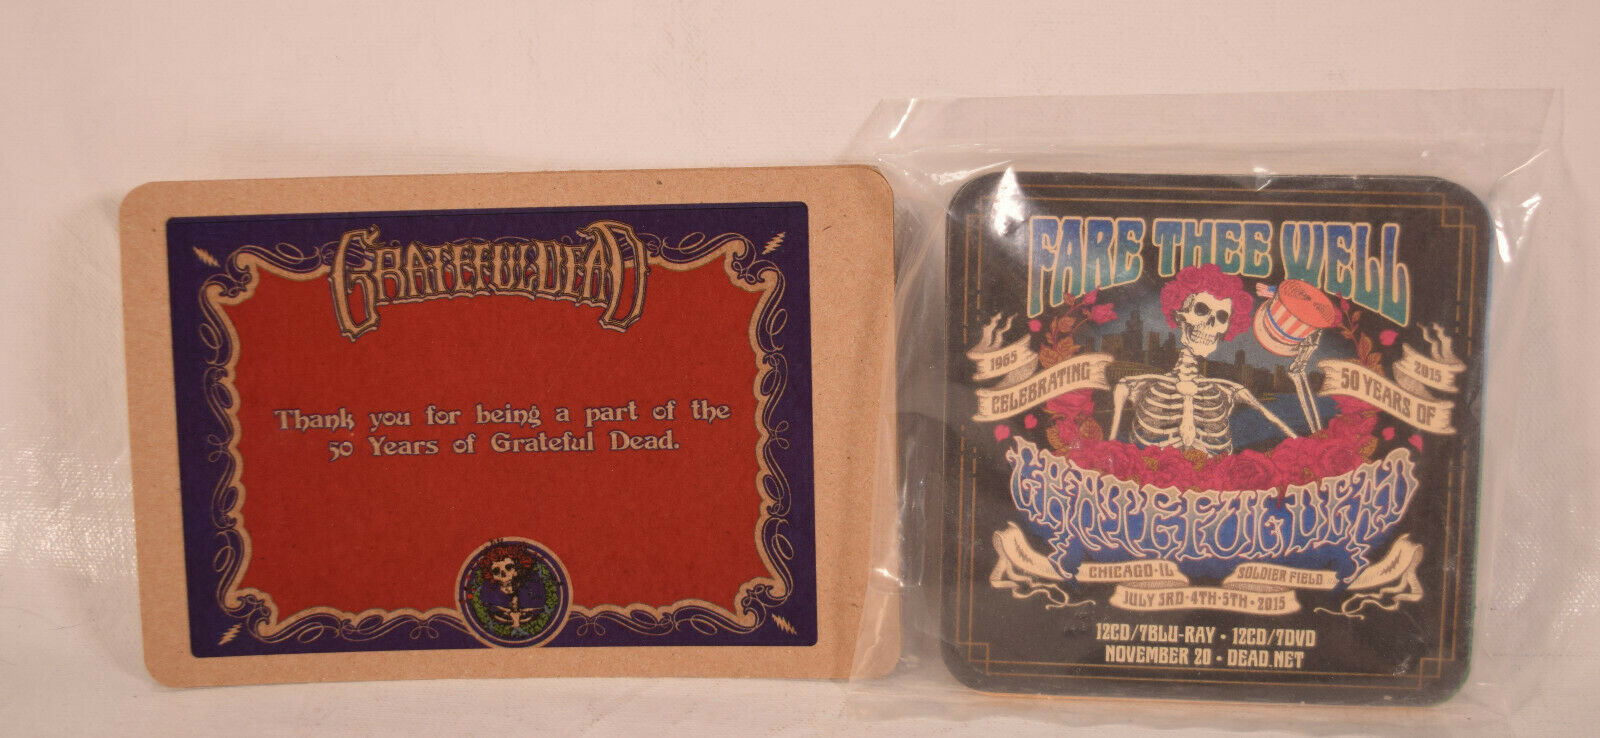 Primary image for Sealed New Unopened Grateful Dead Fare Thee Well Set of 5 Drink Coaster Promo